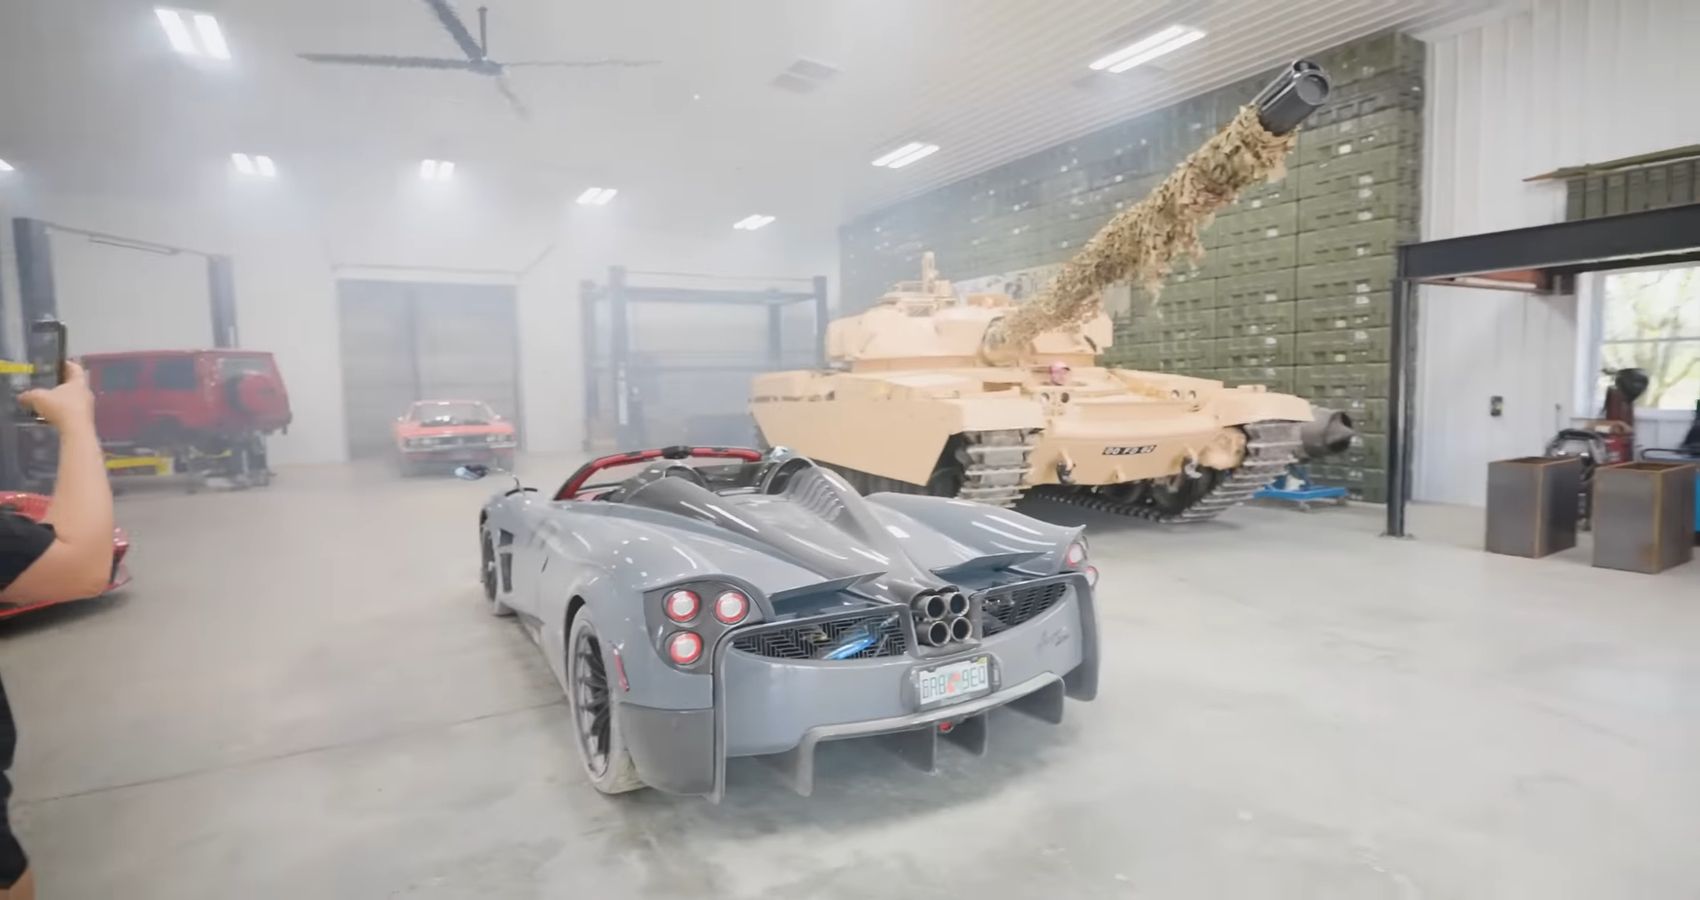 A blue Pagani Huayra Roadster and a sandstorm M1 Abrams Tank